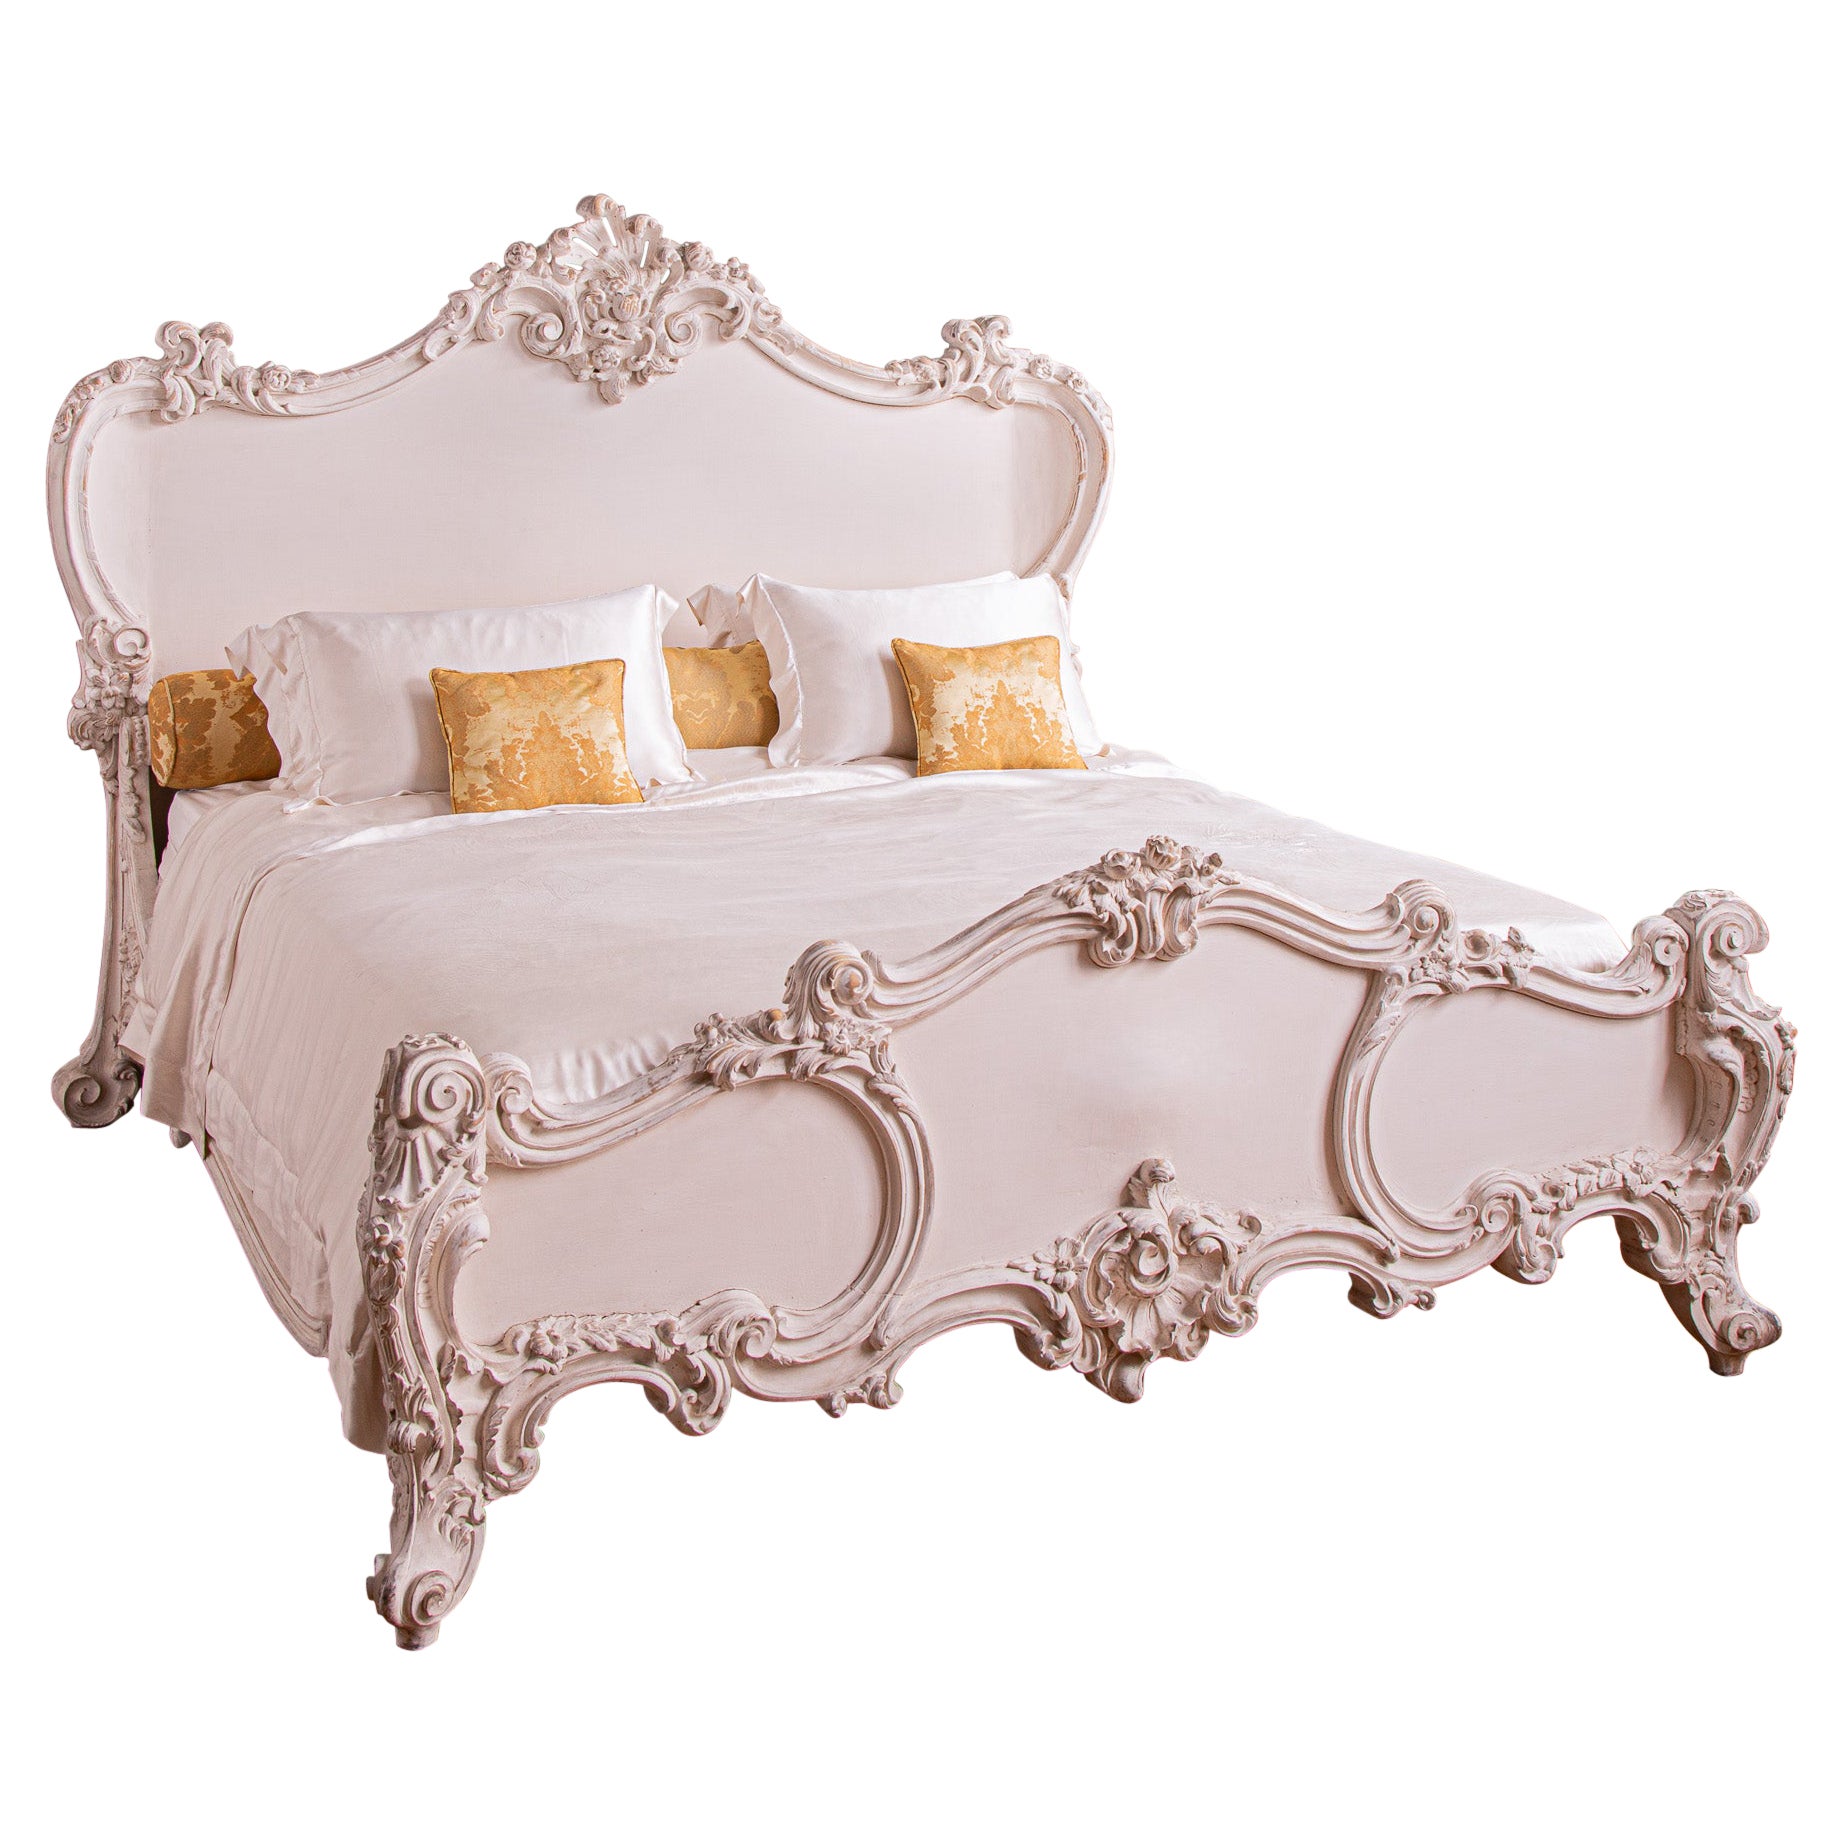 The Cherub Bed Painted In White Gesso By La Maison London  US King For Sale